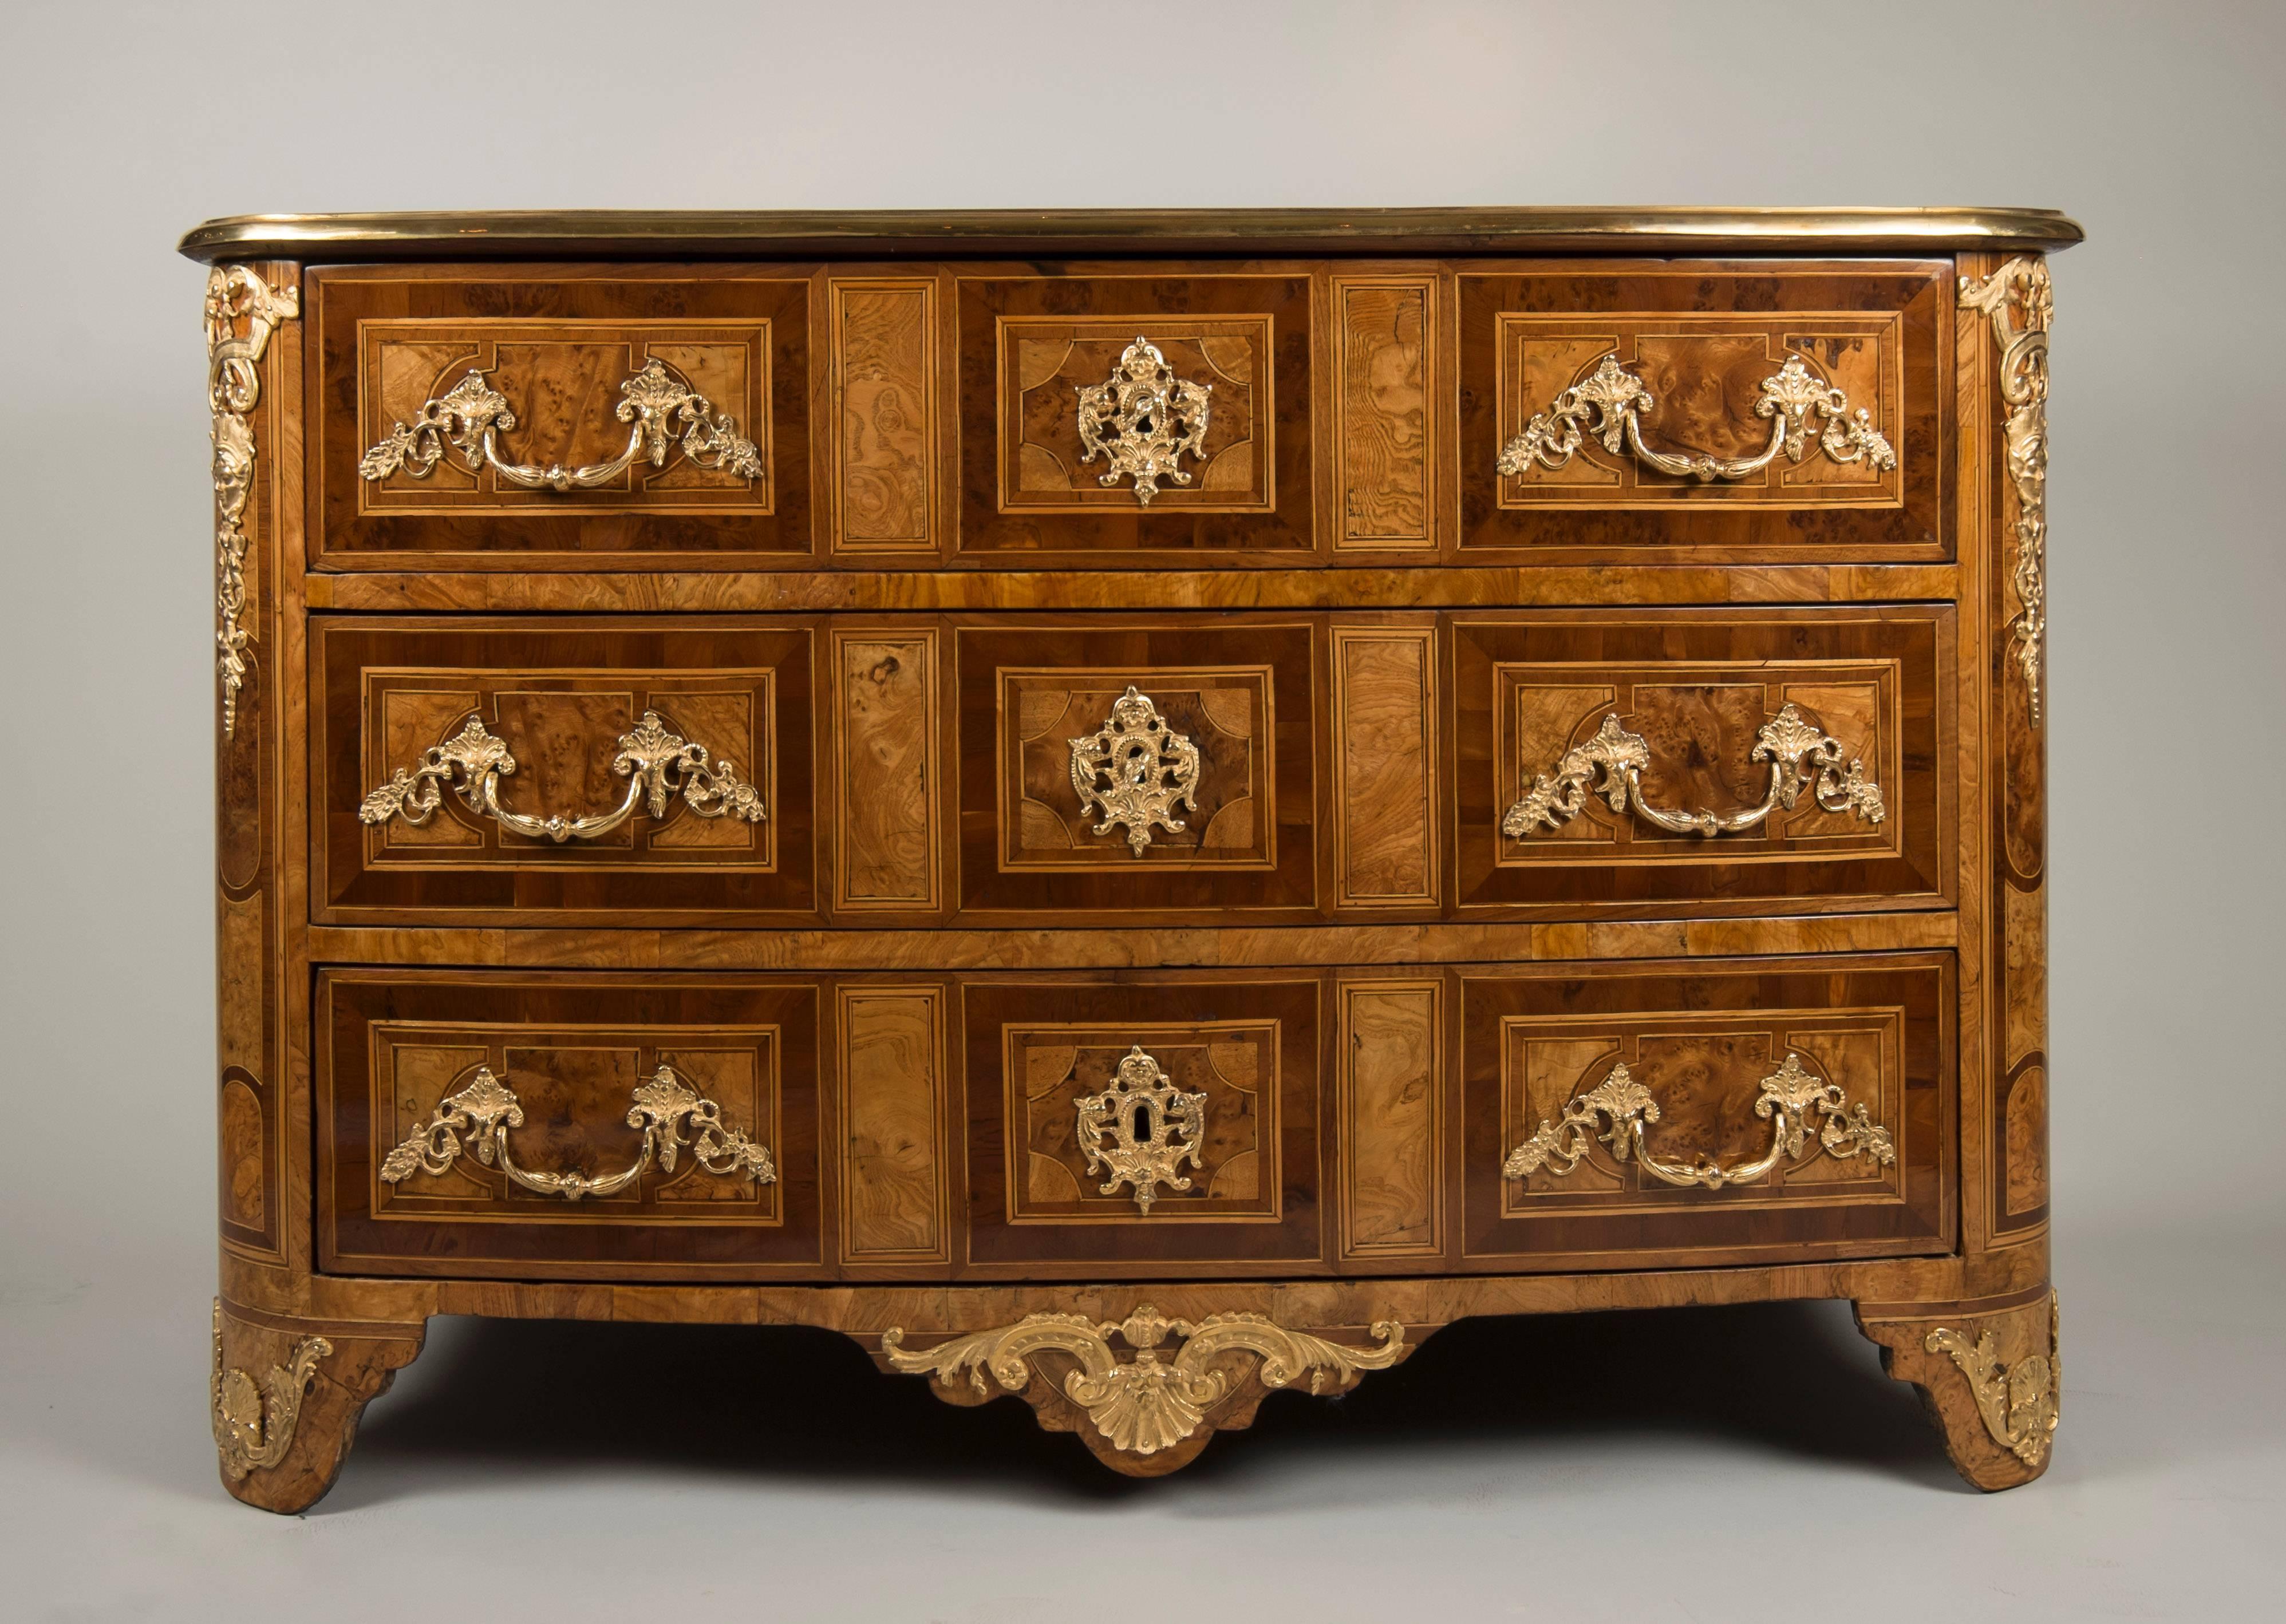 Commode inlaid with burr amboine, walnut, olive tree, ash tree
Bronze ornament.

Work from the Dauphinois attributed to Thomas Hache (1664-1747).

Dimensions : 83 x 130 x 66 cm.